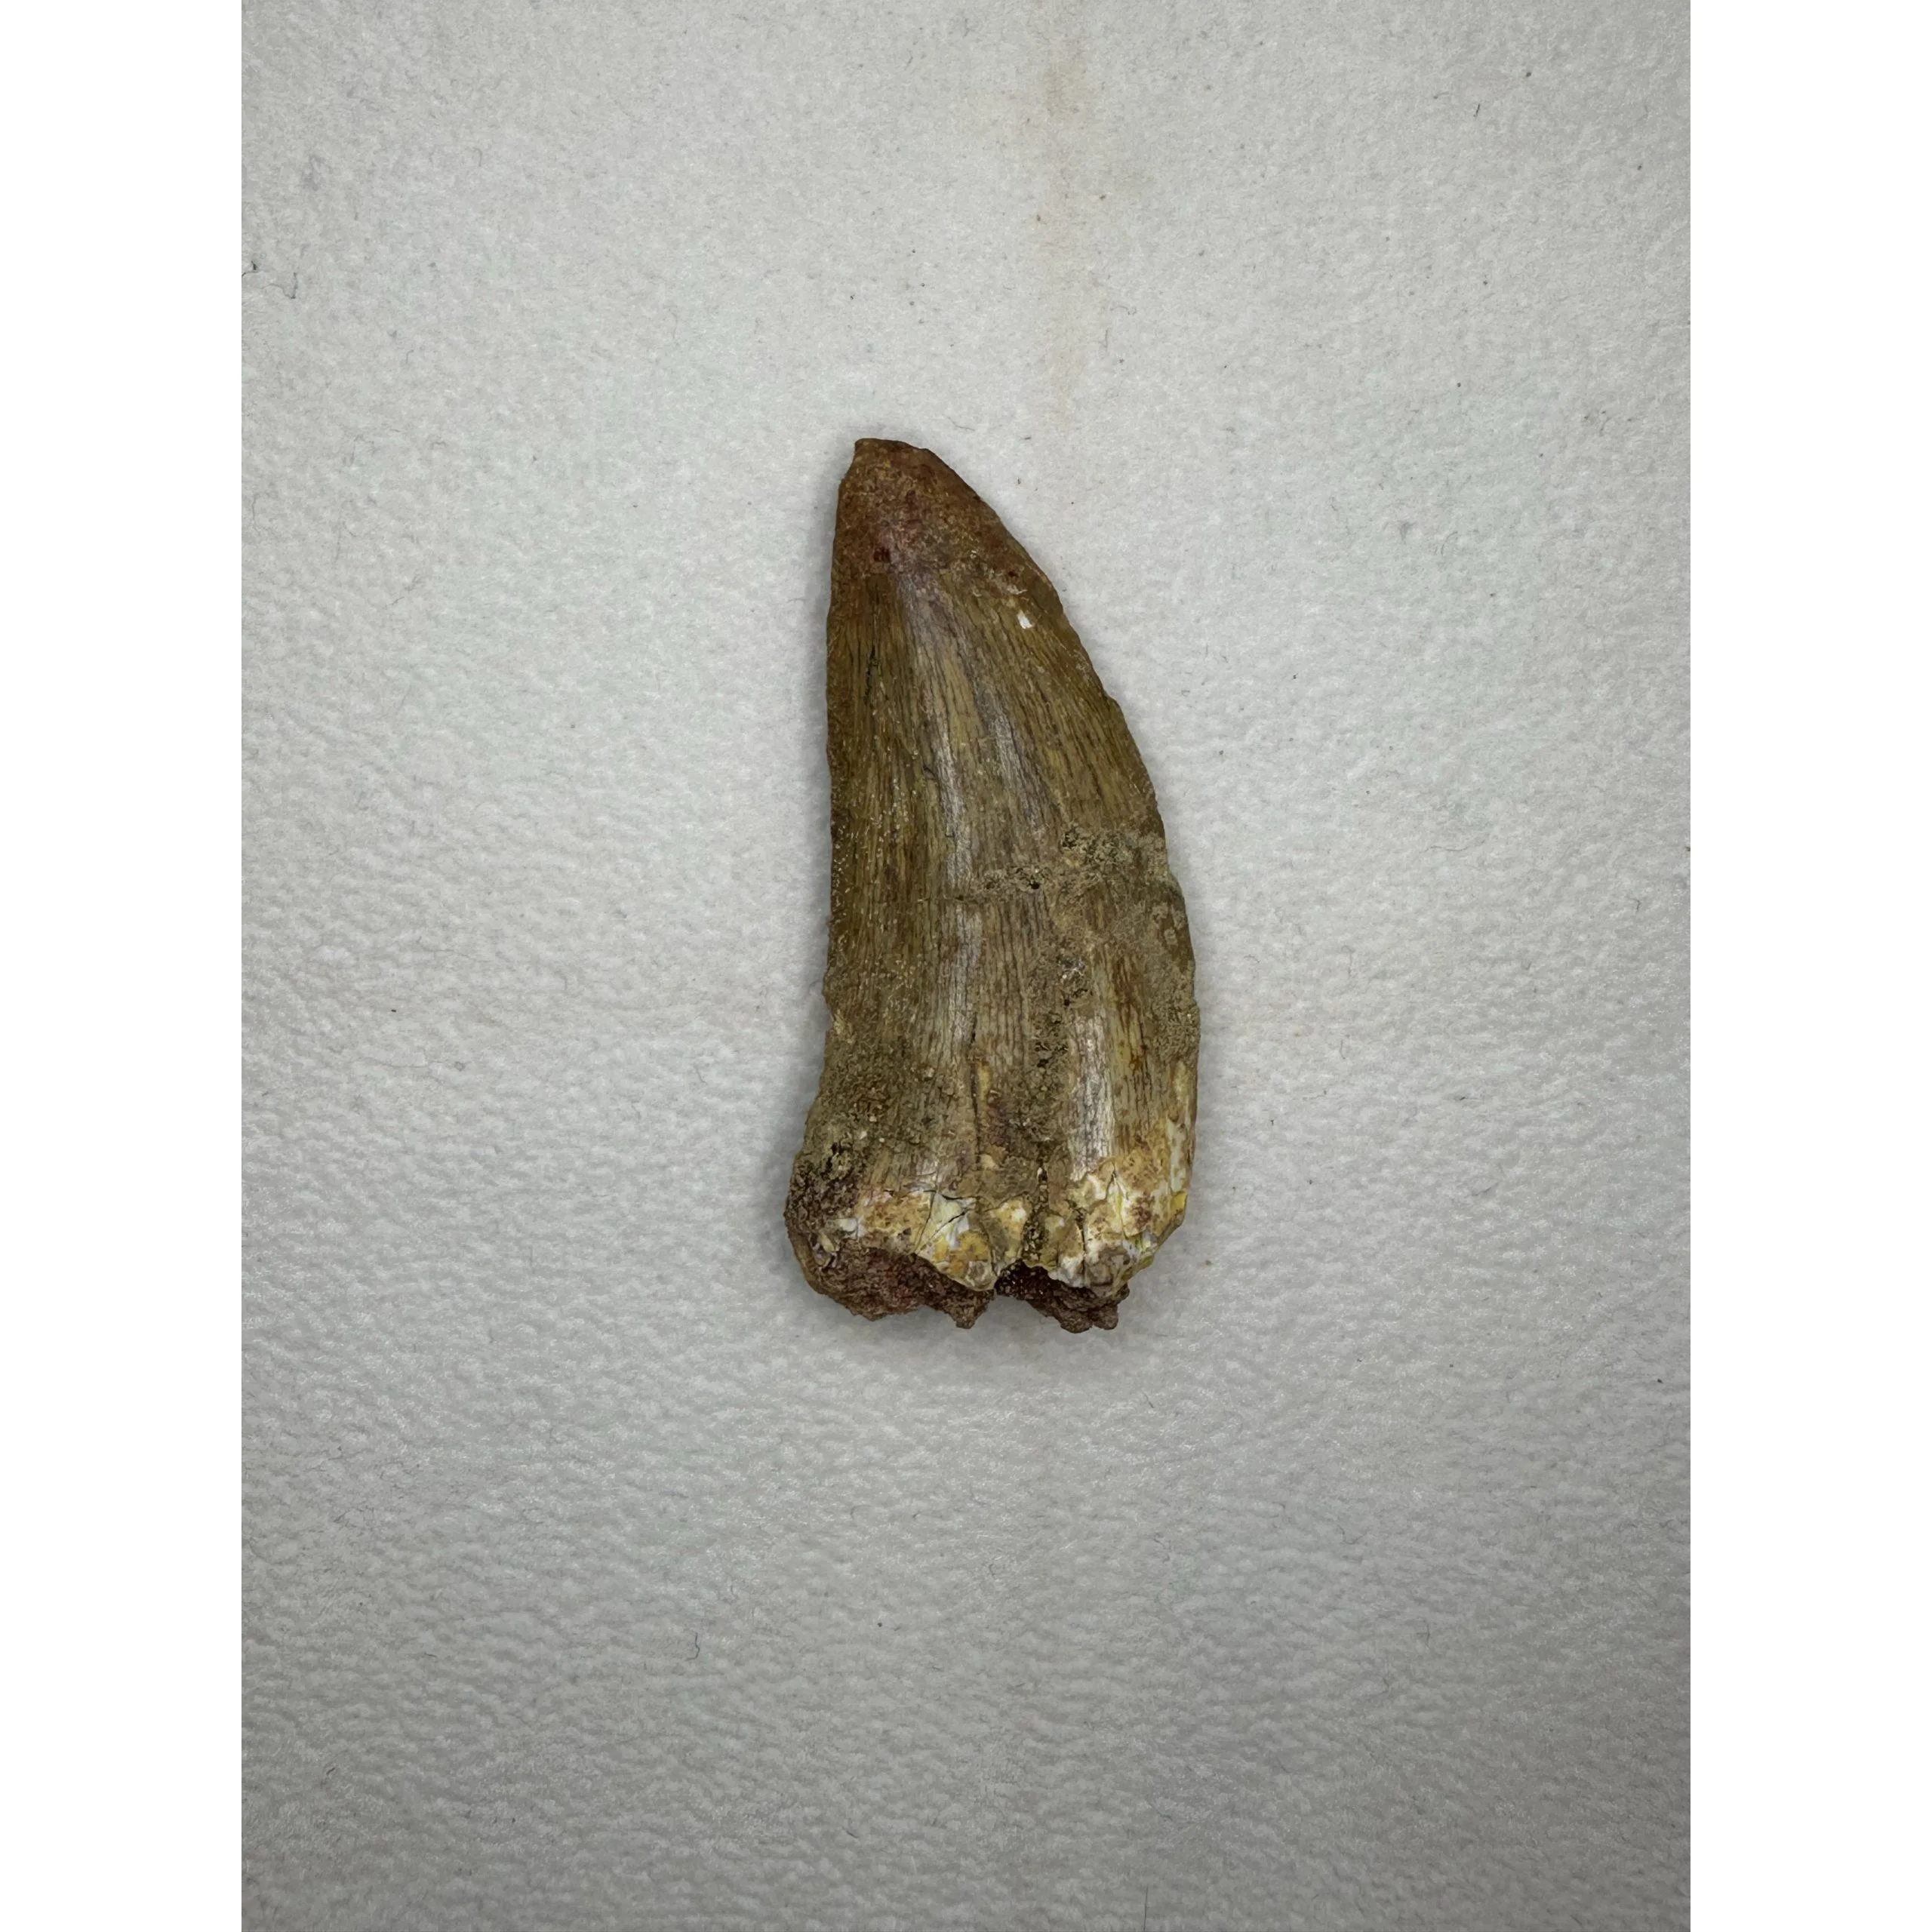 Carcharodontosaurus tooth, Morocco, 2 1/4 inches Prehistoric Online